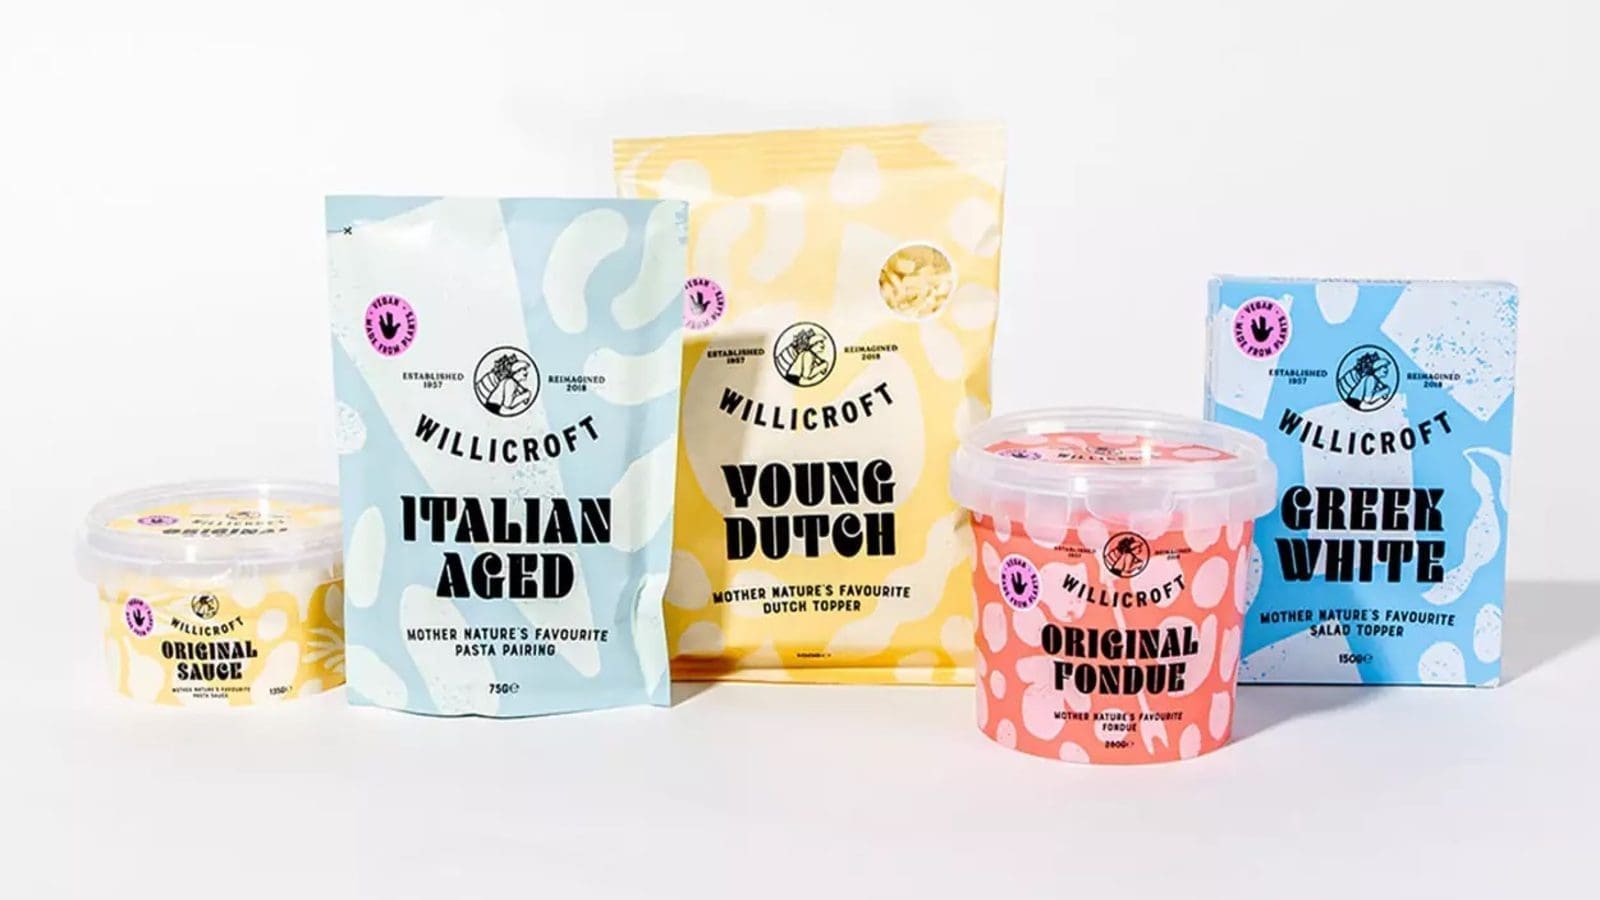 Willicroft raises US$1.74M for expansion of plant-based cheese in UK market